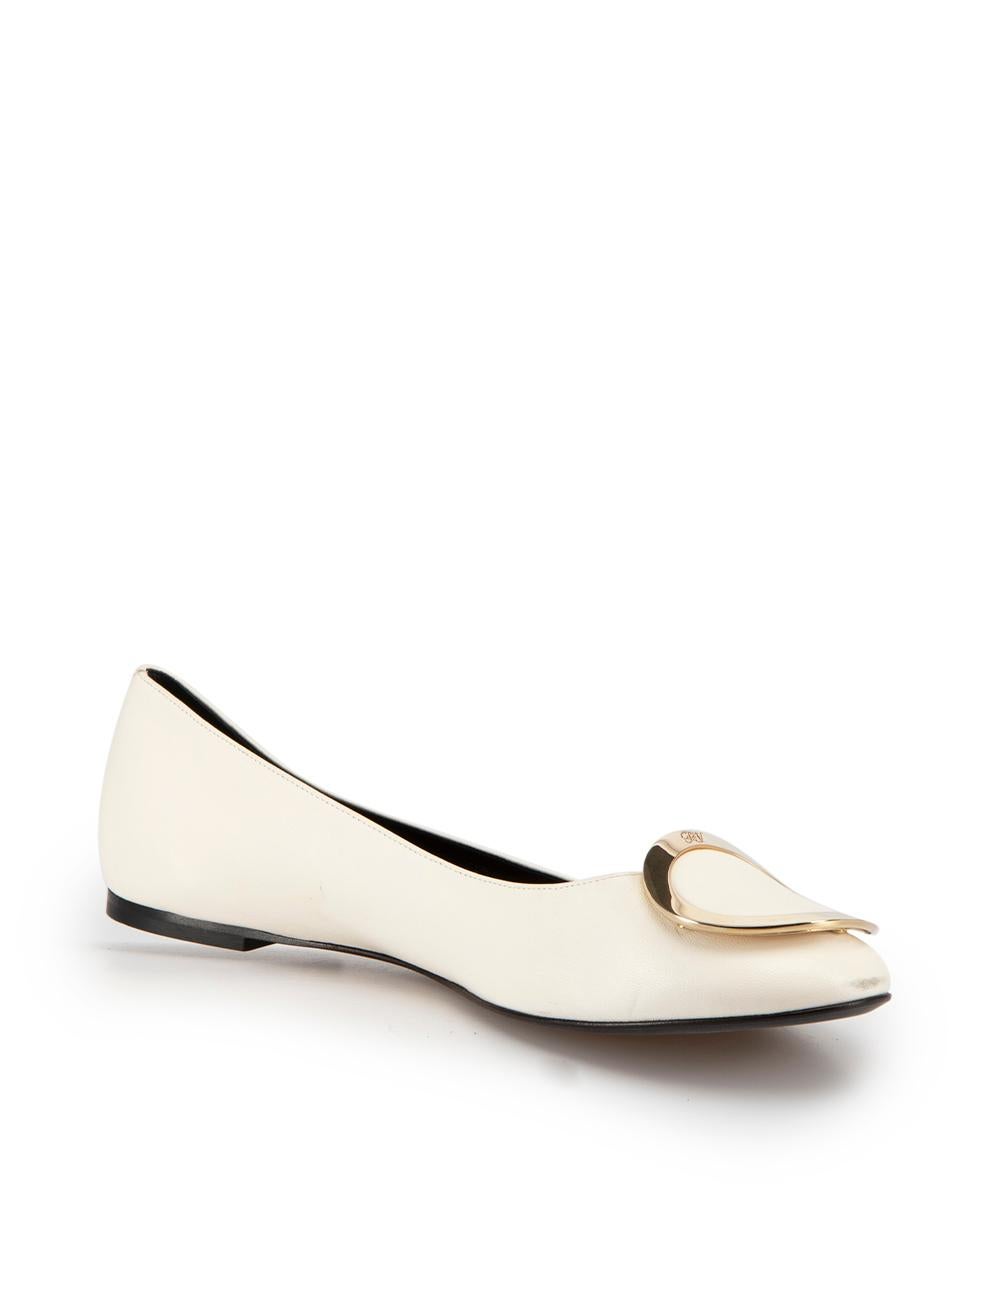 CONDITION is Very Good. Minimal wear to pumps is evident. Minimal wear to the front and heel of the right shoe with small scuffs is evident on this used Roger Vivier designer resale item.



Details


White

Leather

Ballet flats

Gold buckle